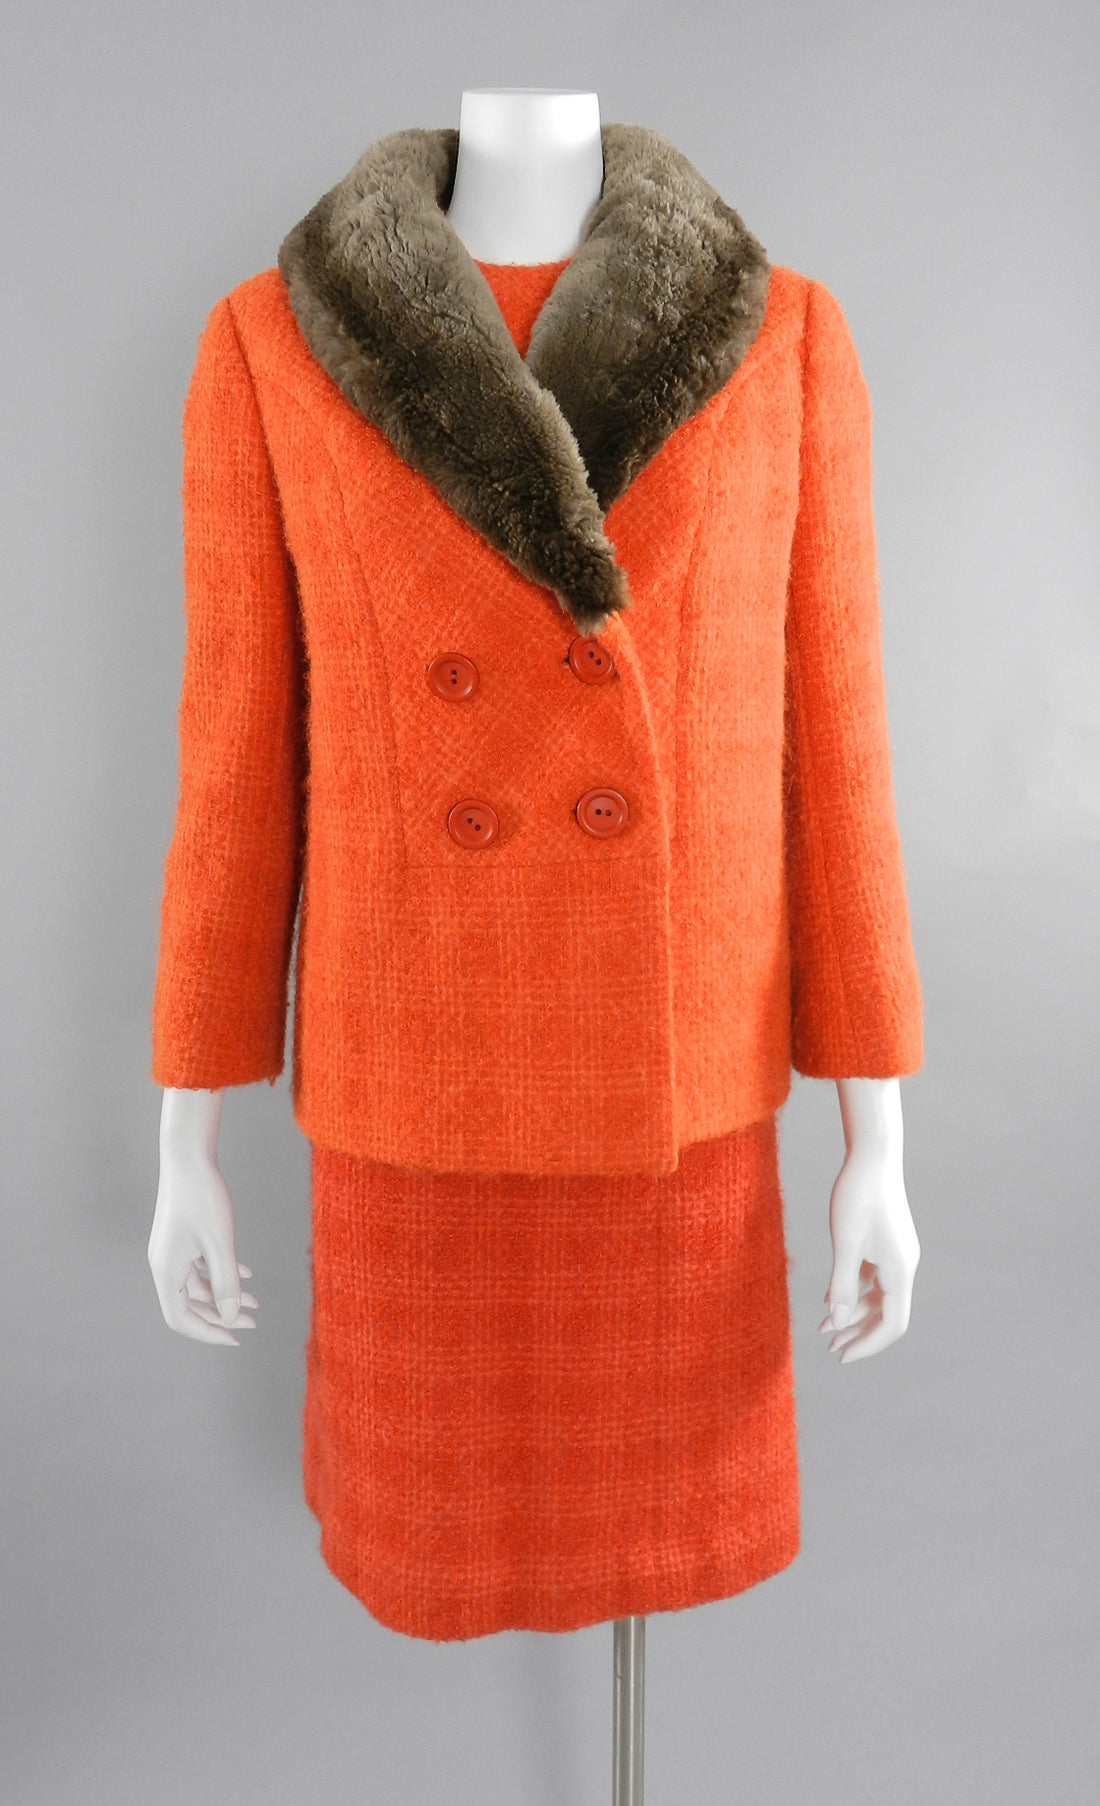 Vintage Couture early 1960's Norman Hartnell Orange Wool Dress and Jacket Suit